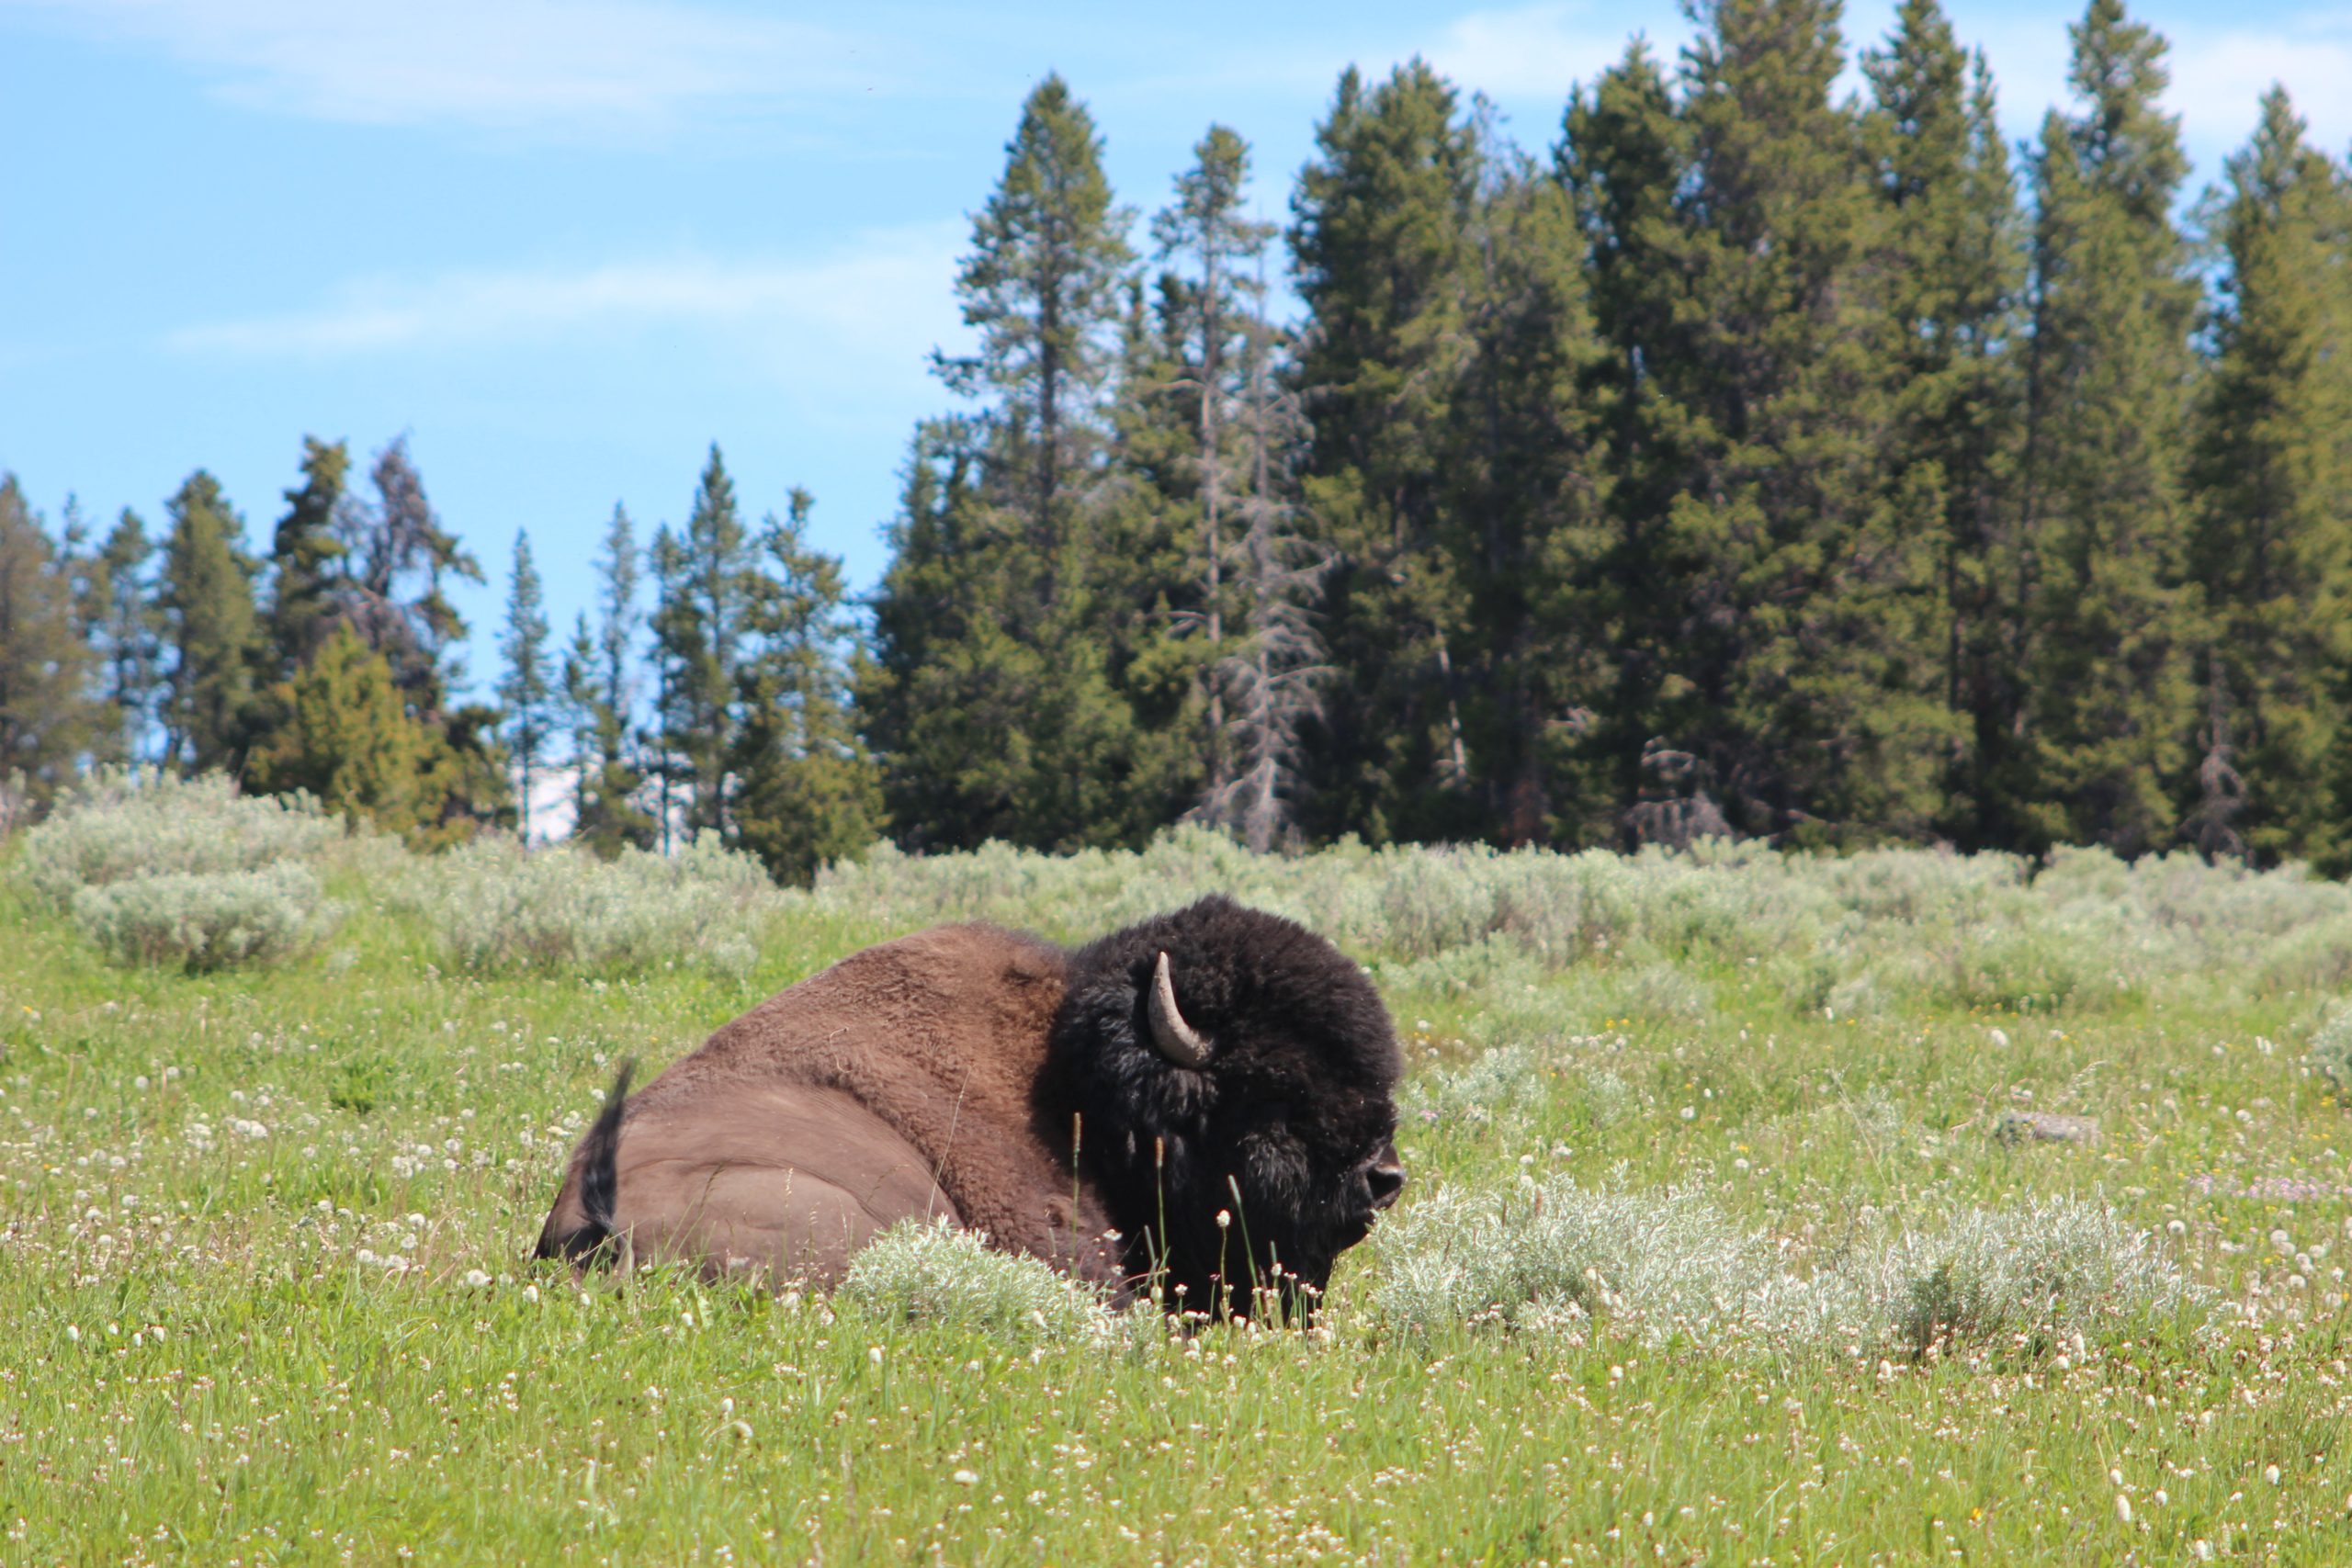 Bison resting in a field on a sunny day